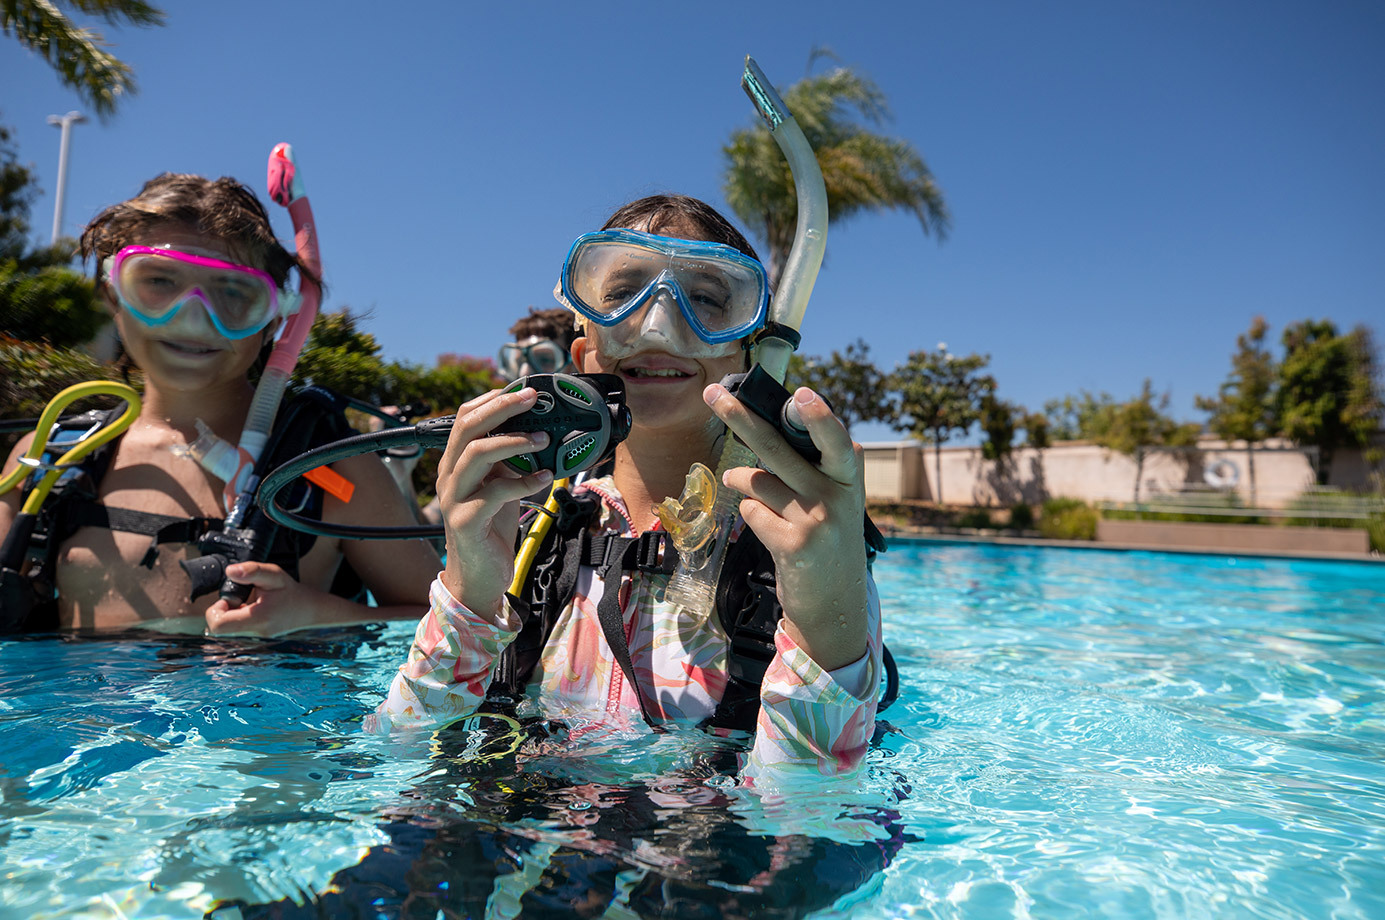 A PADI Junior Open Water Diver student practicing in the pool who is 10 years old, the minimum Junior Open Water Diver age